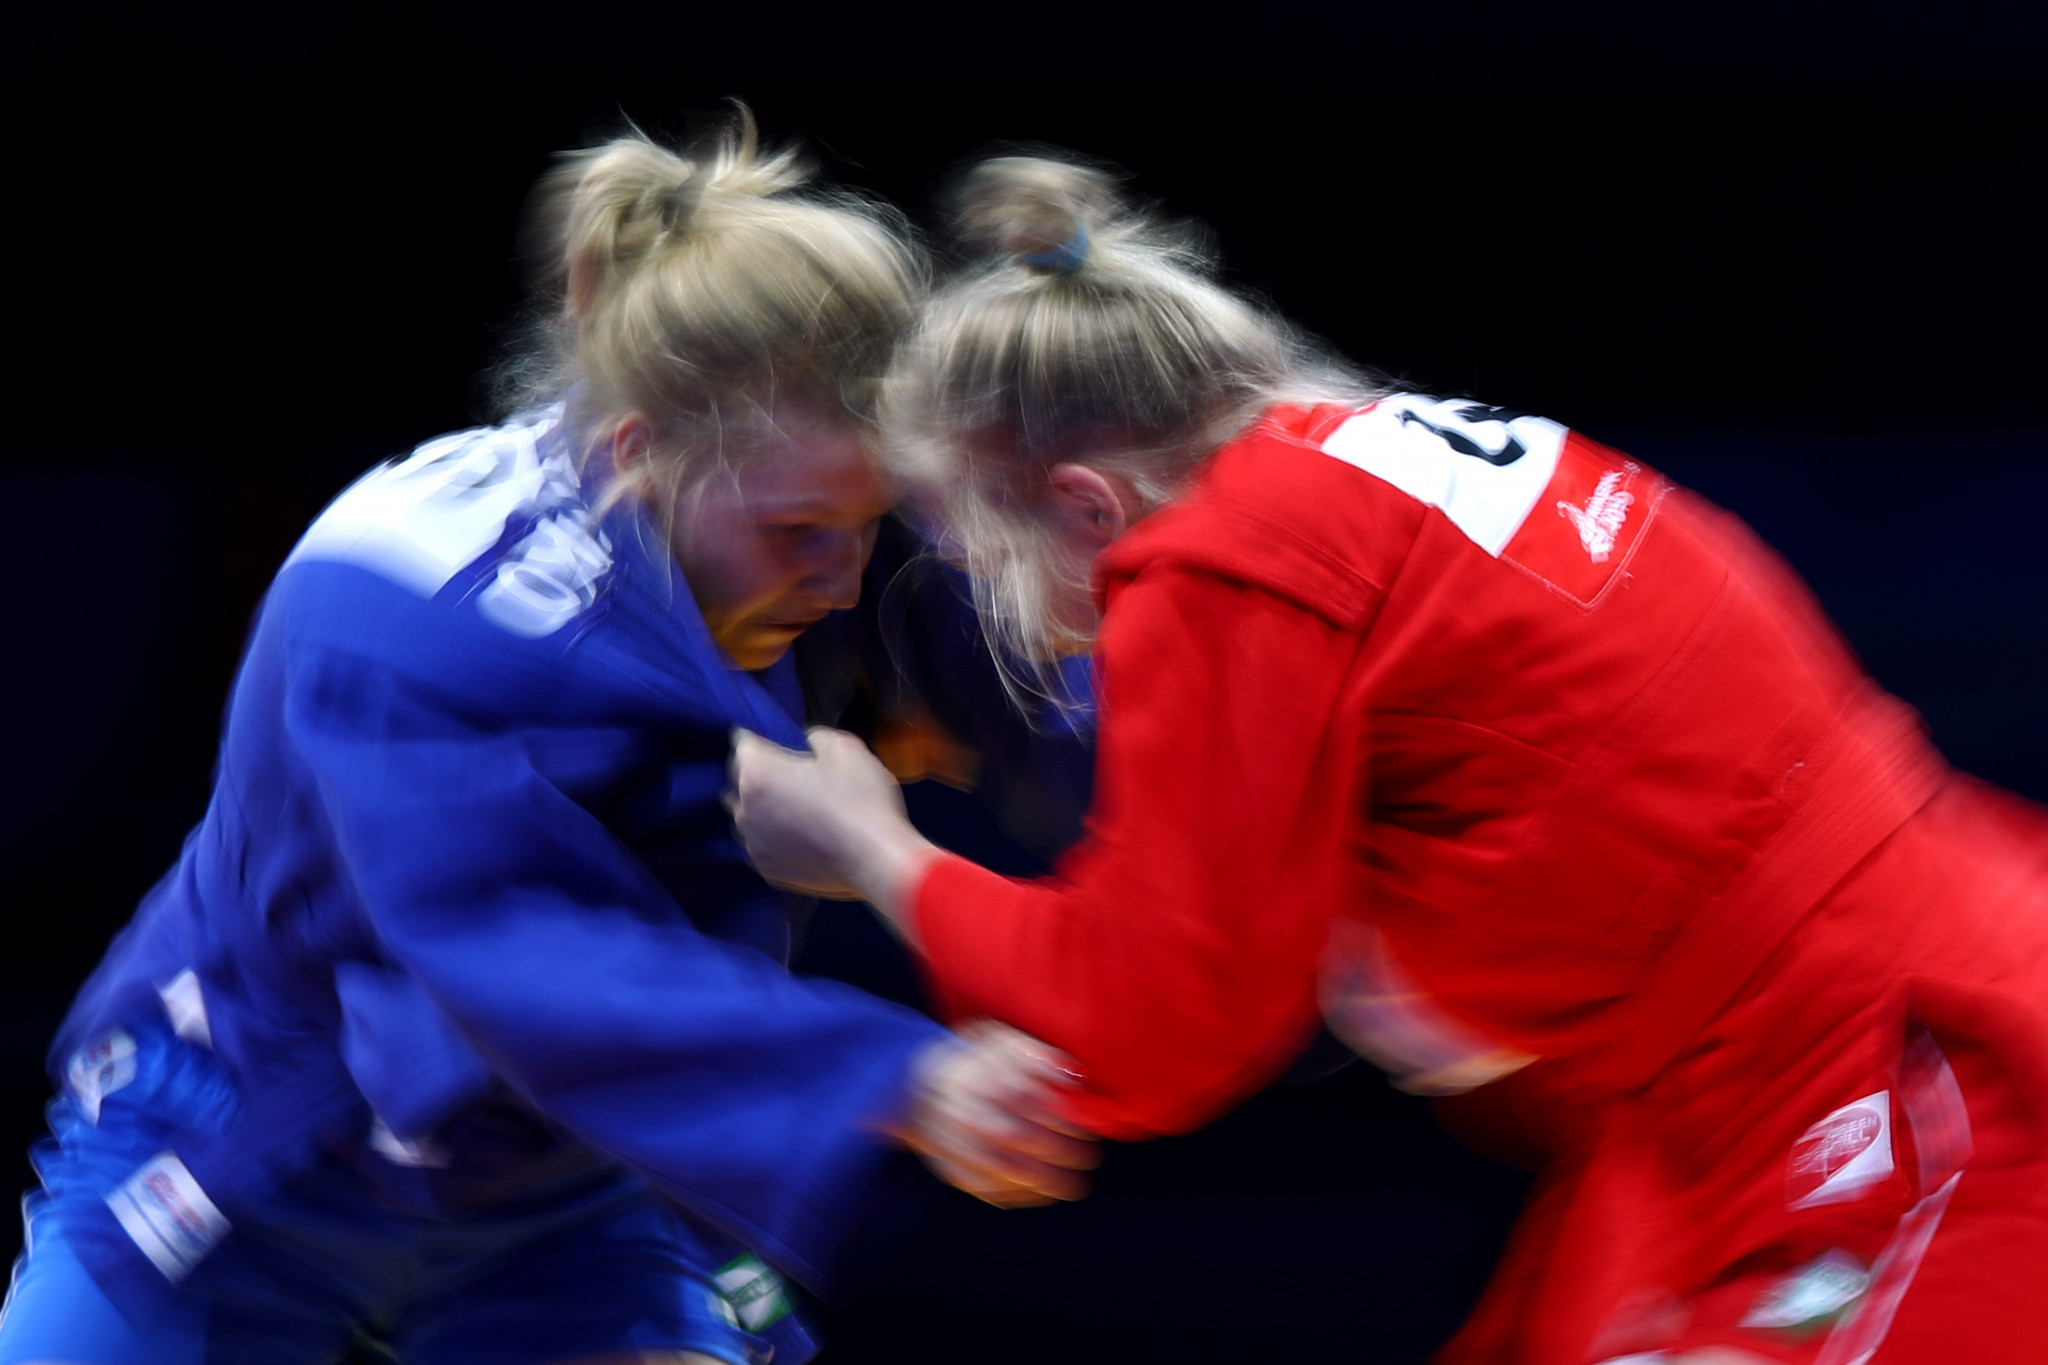 The International Sambo Federation is working towards greater gender equality ©Getty Images